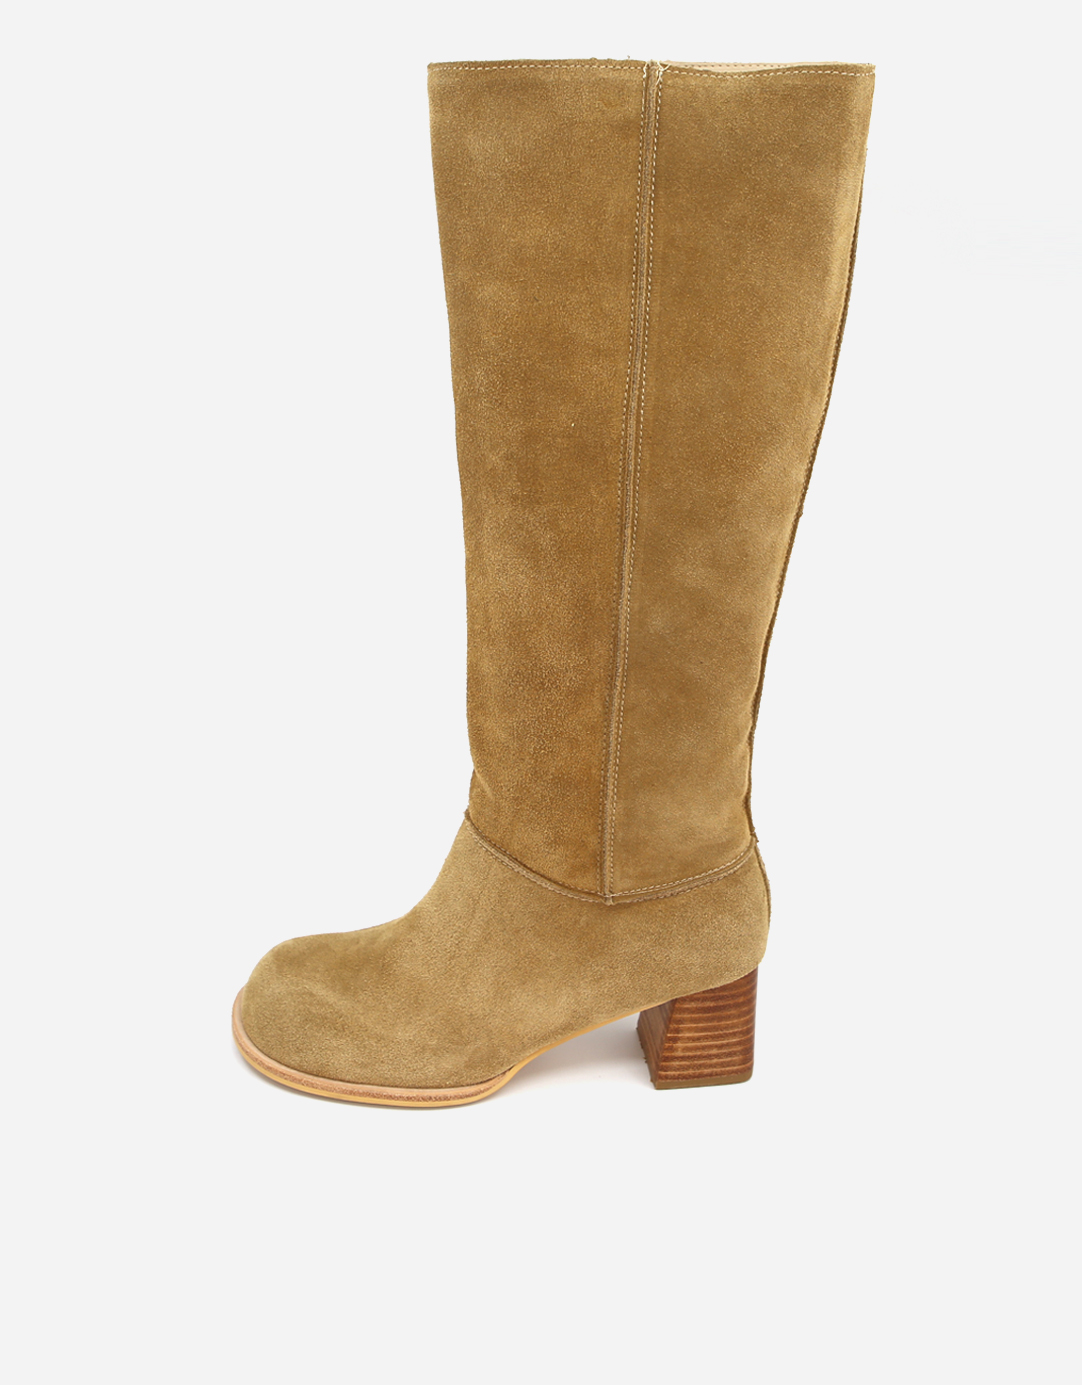 ROUND MIDDLE HEEL LONG BOOTS